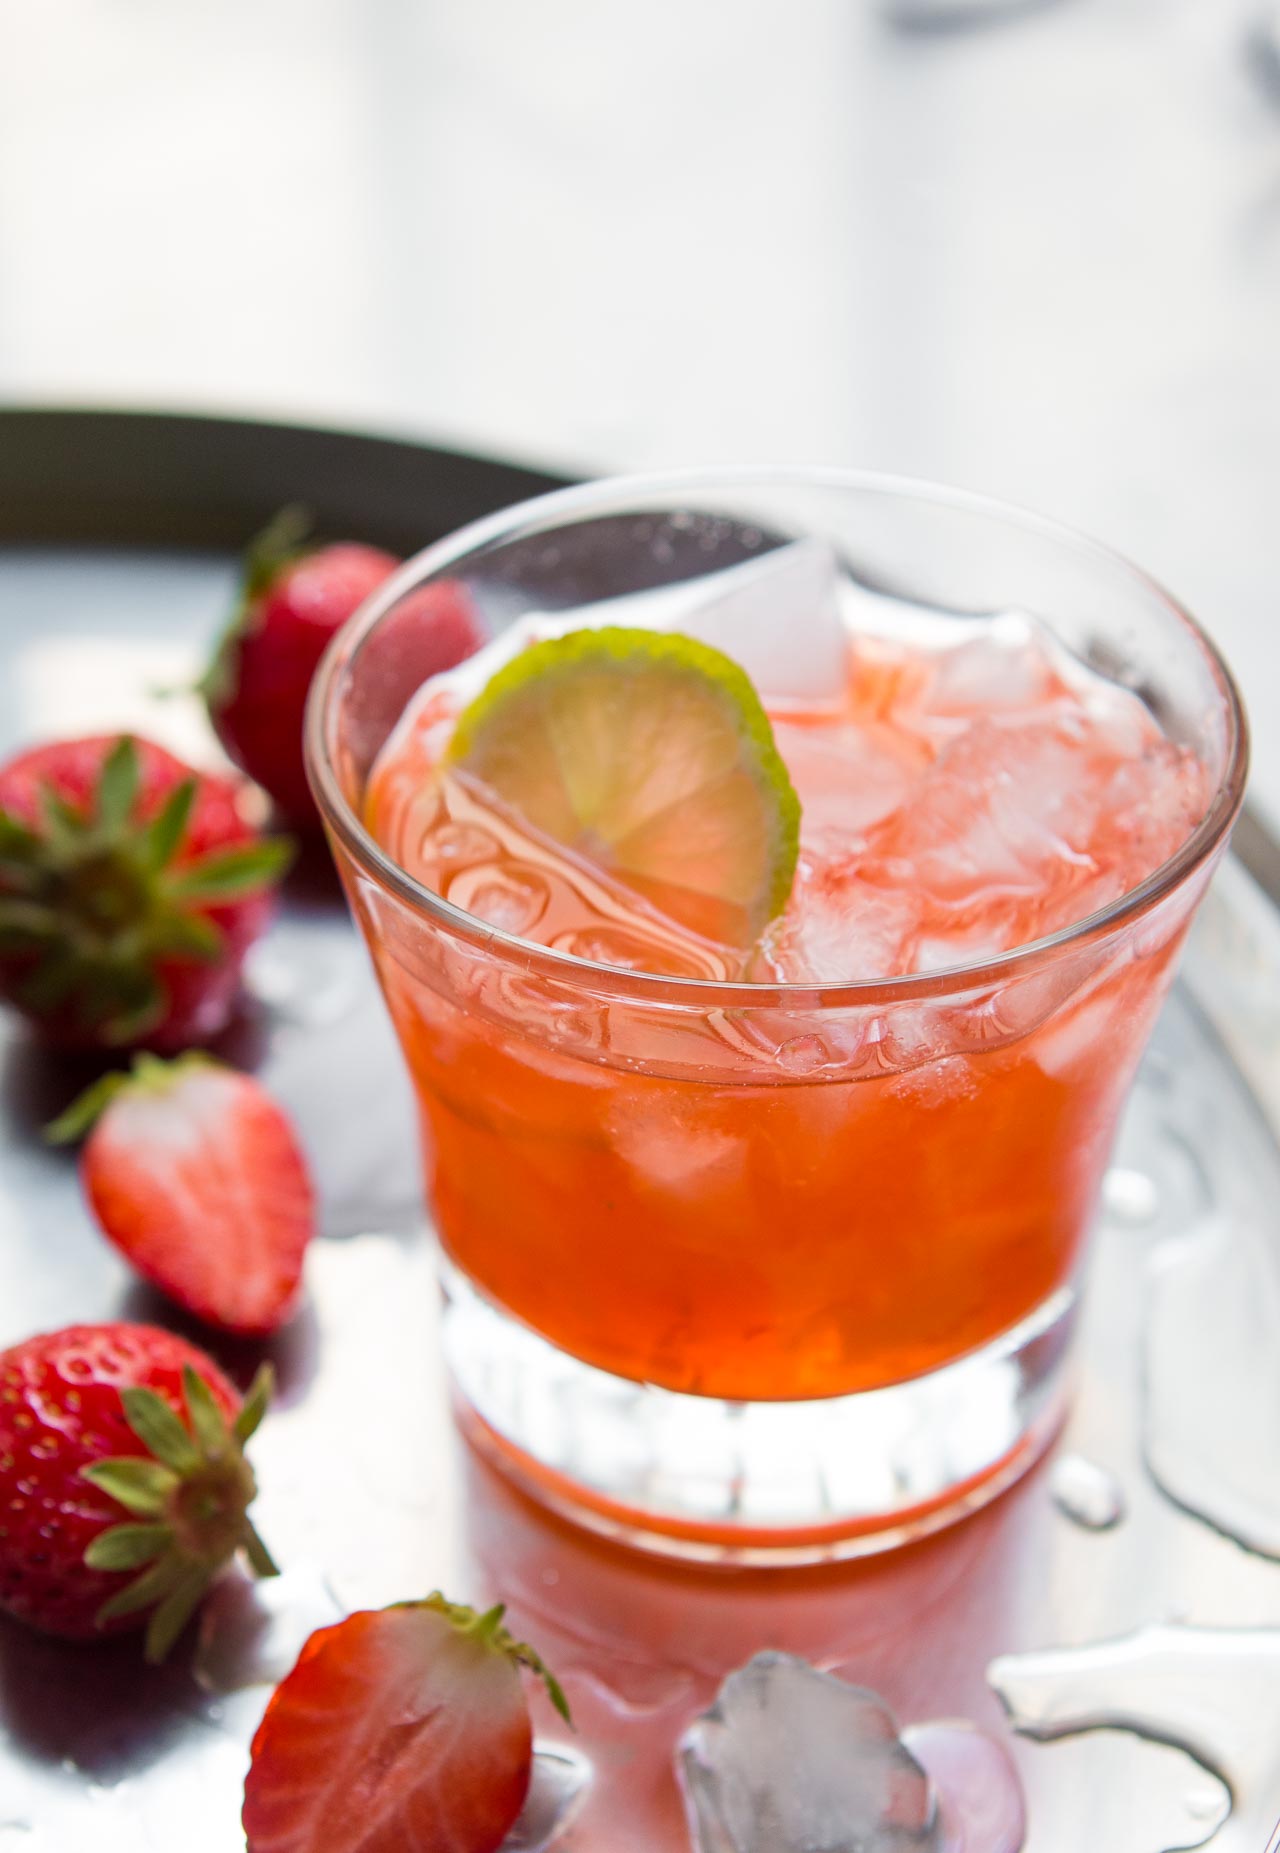 A great cocktail to celebrate spring and summer berries, the Strawberry Margarita!